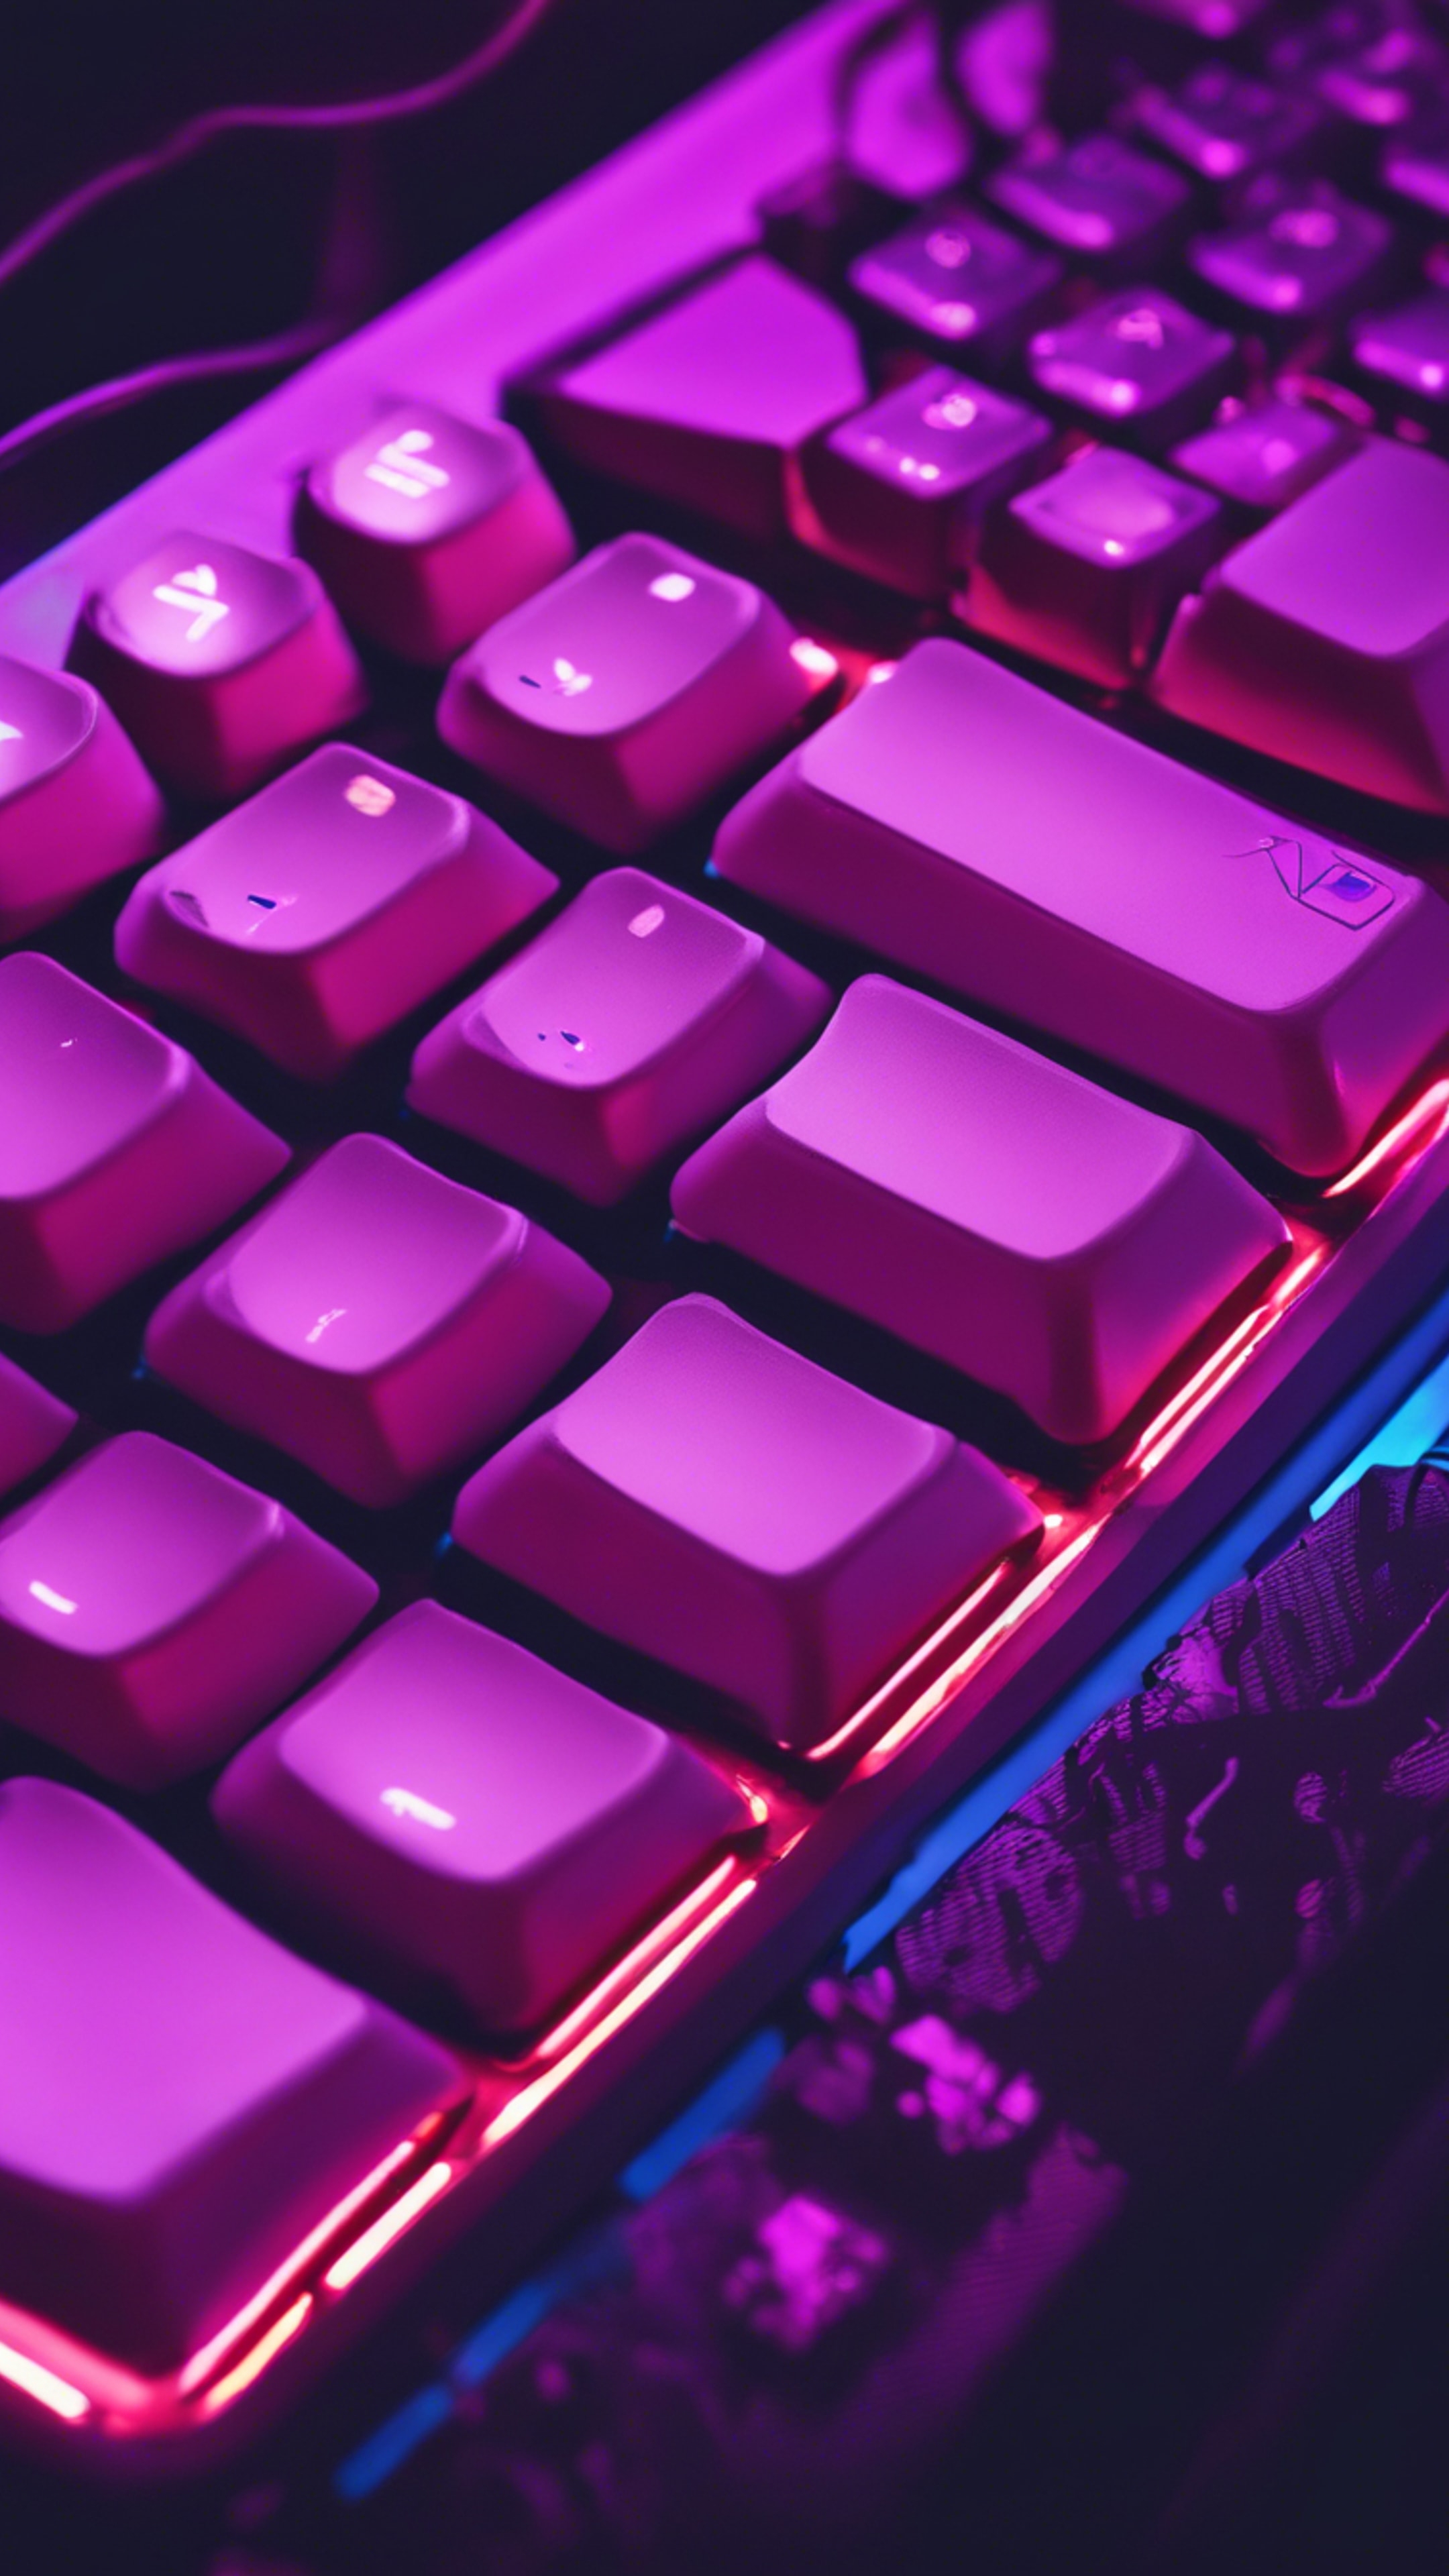 A detailed close-up image of a neon purple backlit gaming keyboard in a dark room. Tapeta[fb3f2373aec546b8b630]